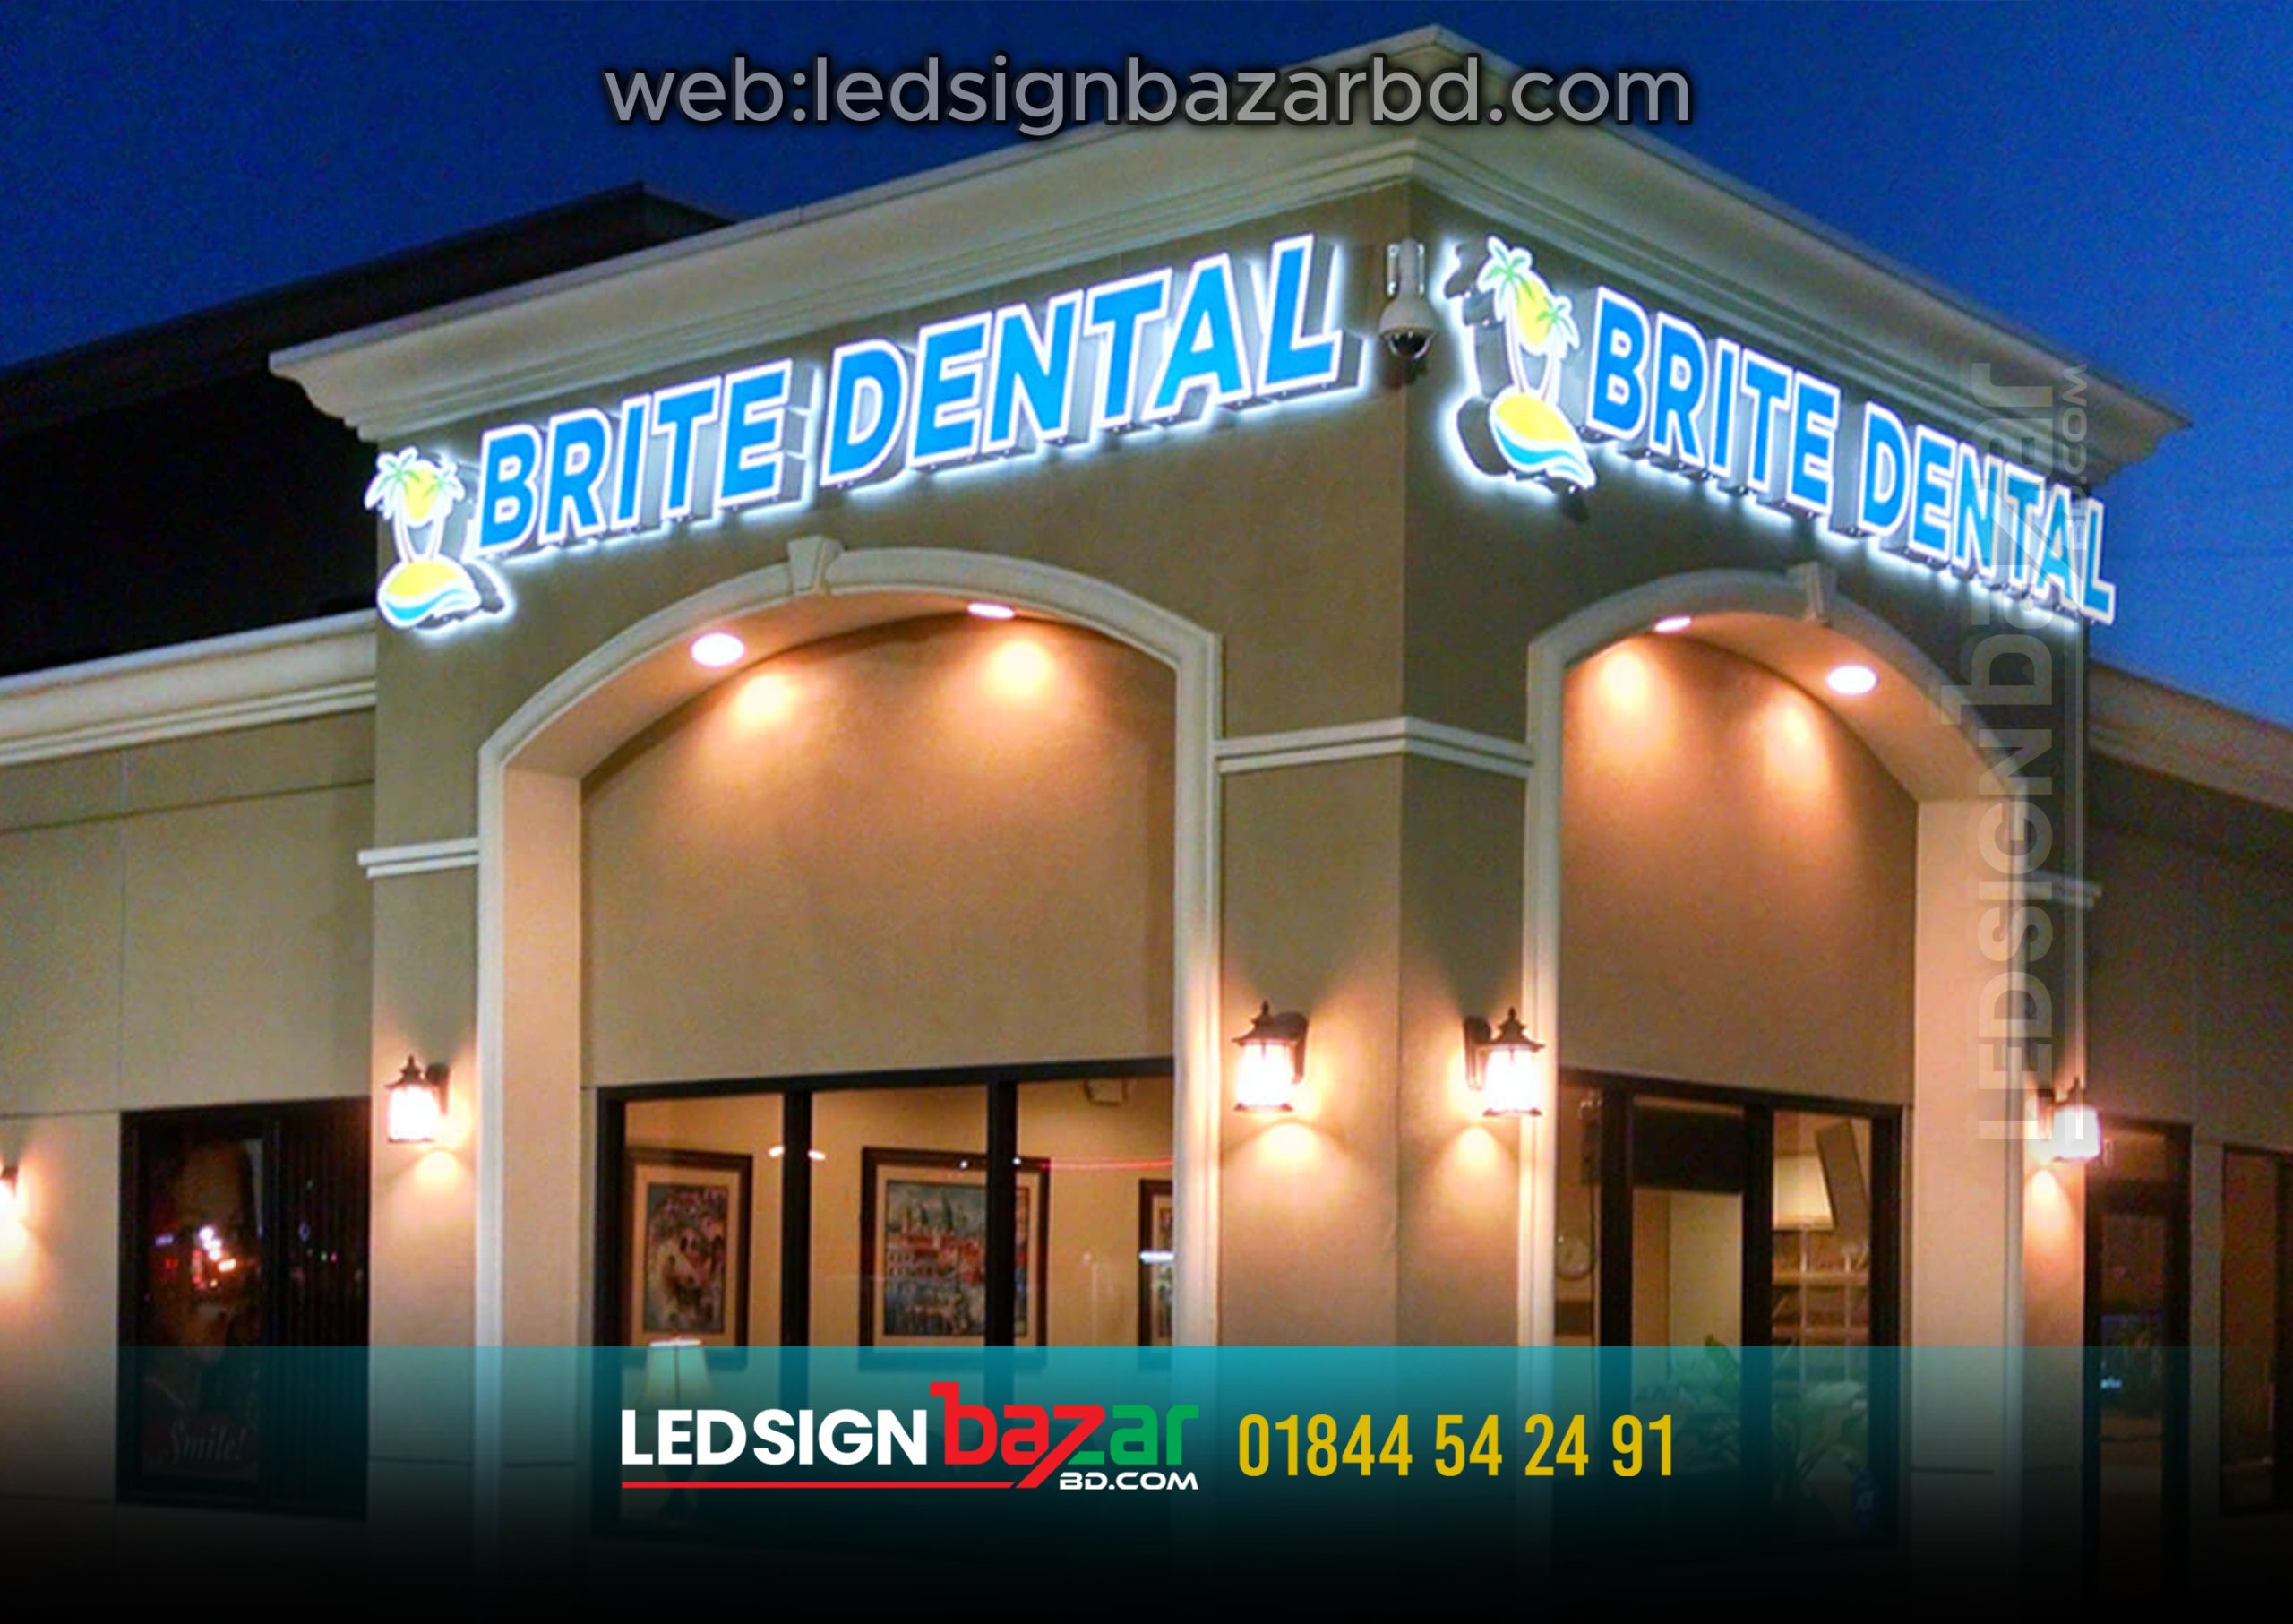 BRITE DENTAL ACRYLIC LOGO AND LETTER SIGNBOARD MAKING FOR SHOP SIGN BD